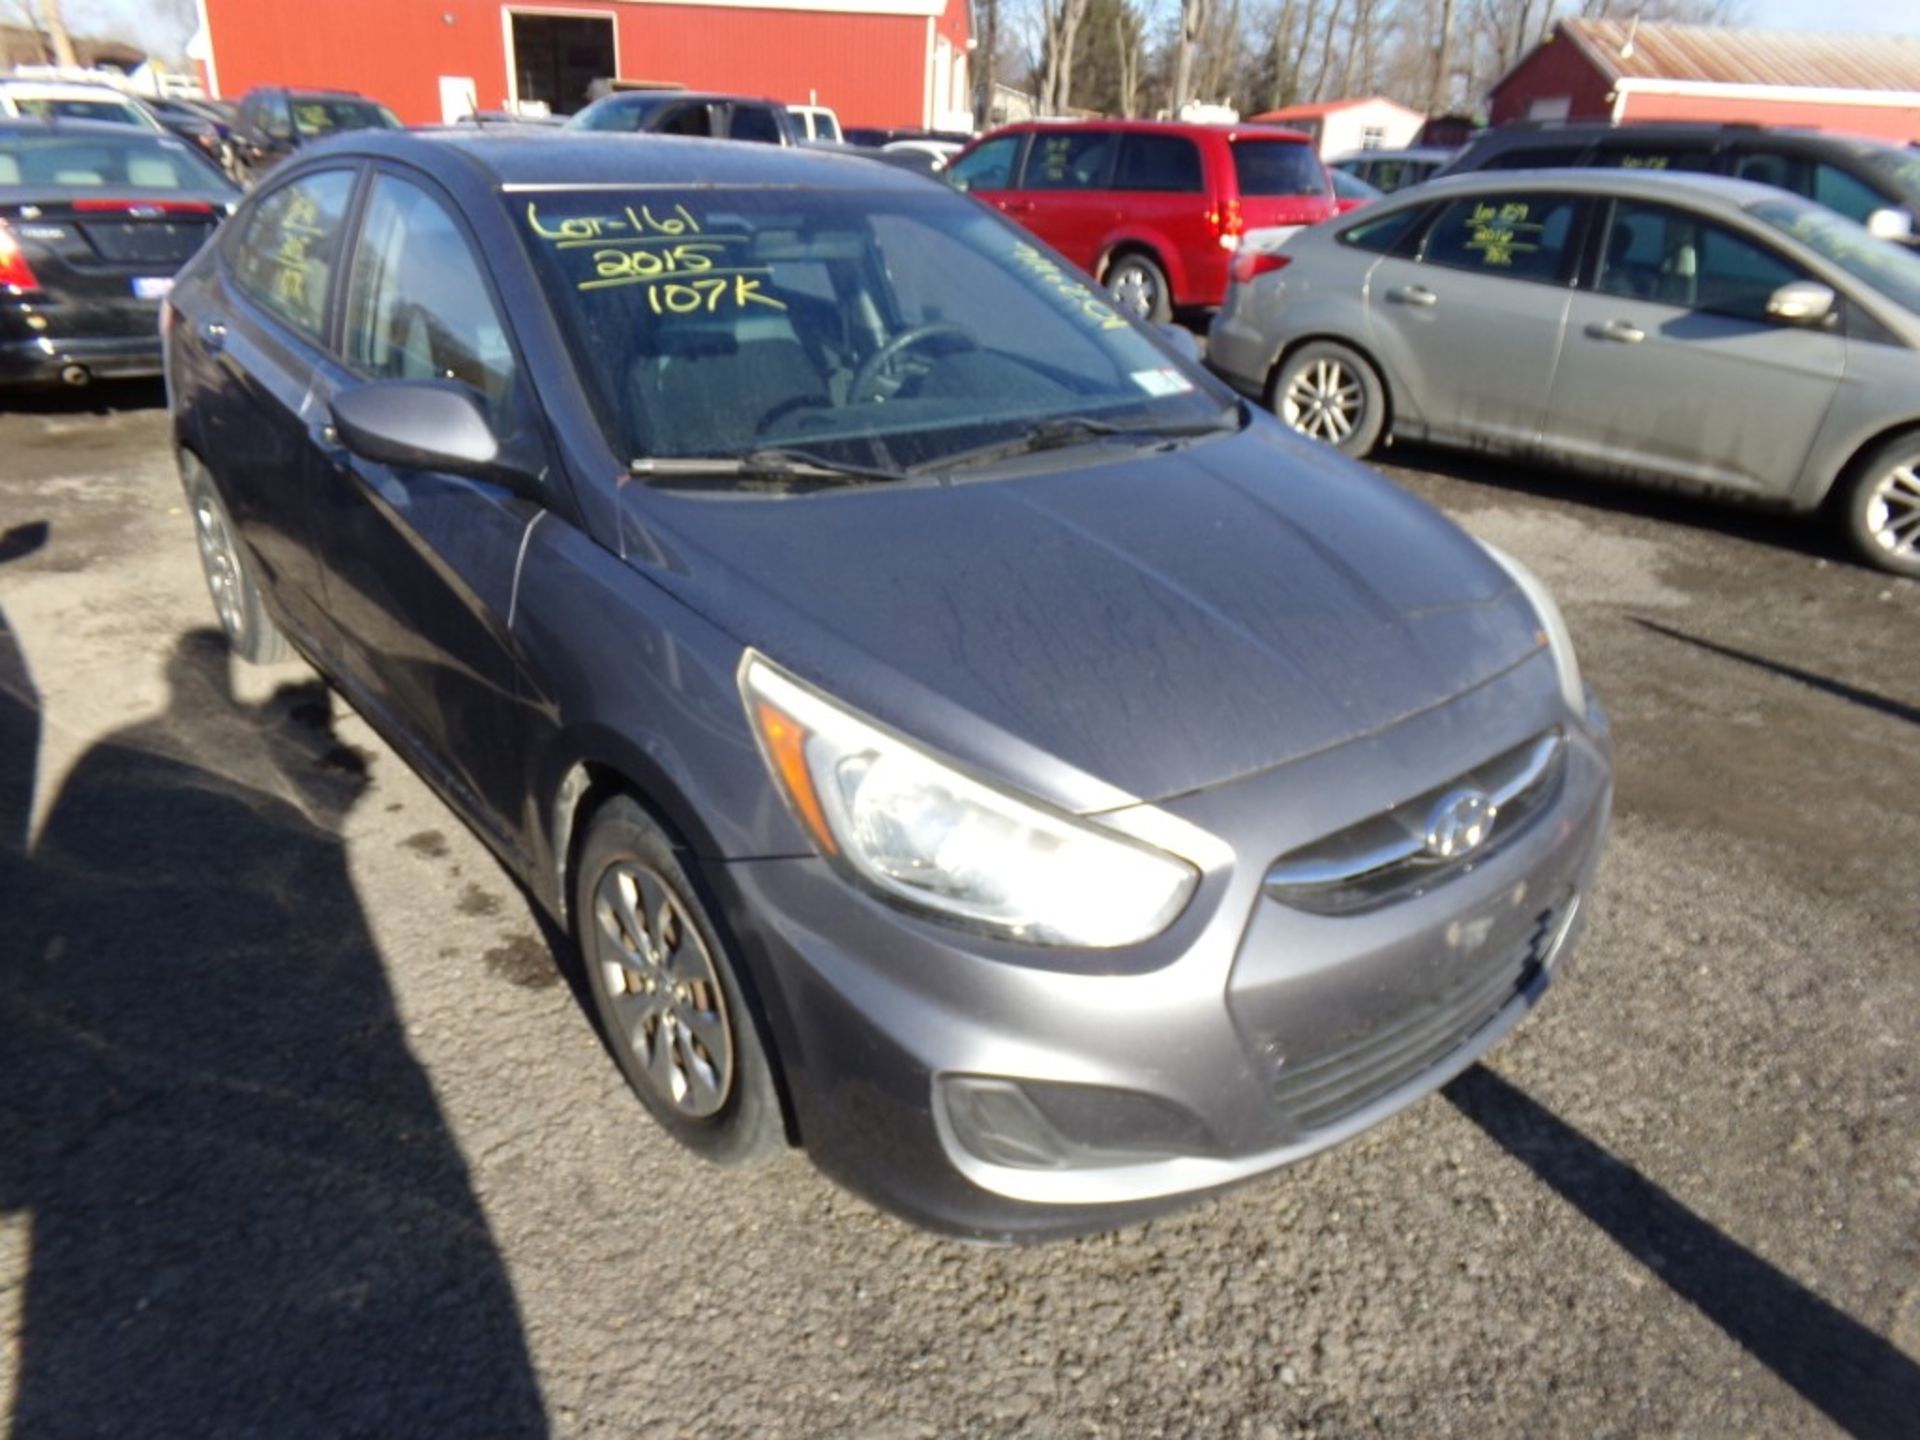 2015 Hyundai Accent GLS, Gray, 107,416 Miles, VIN# KMHCT4AE2FU914723 - OPEN TO ALL BUYERS, SMALL - Image 6 of 6